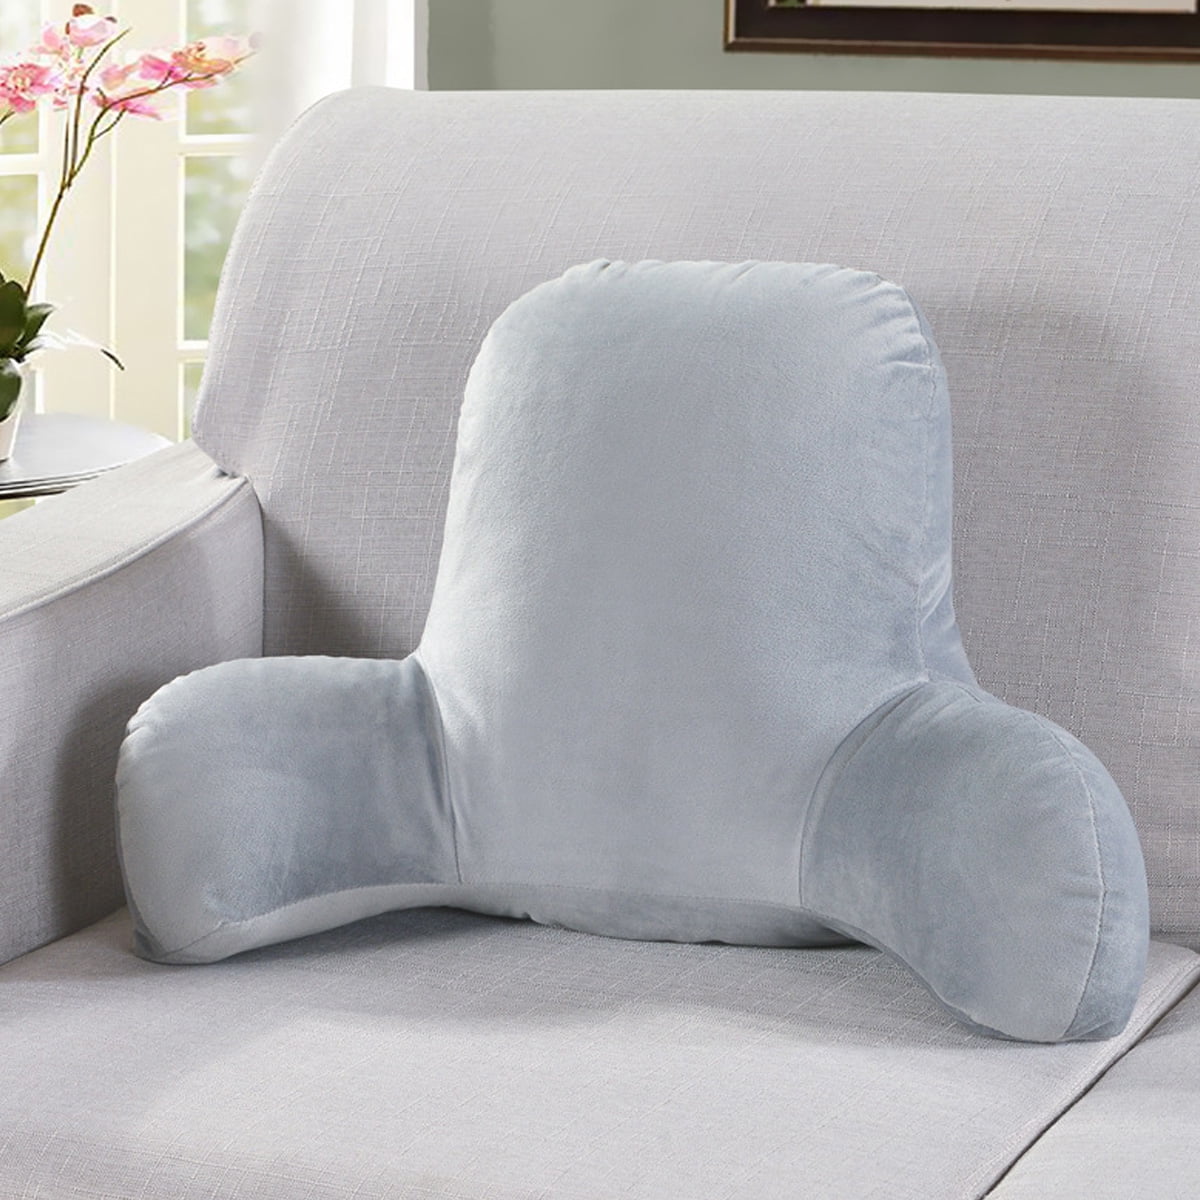 Back rest Pillow Bed Cushion Support Reading Arms Chair Lounger Memory Foam Home 